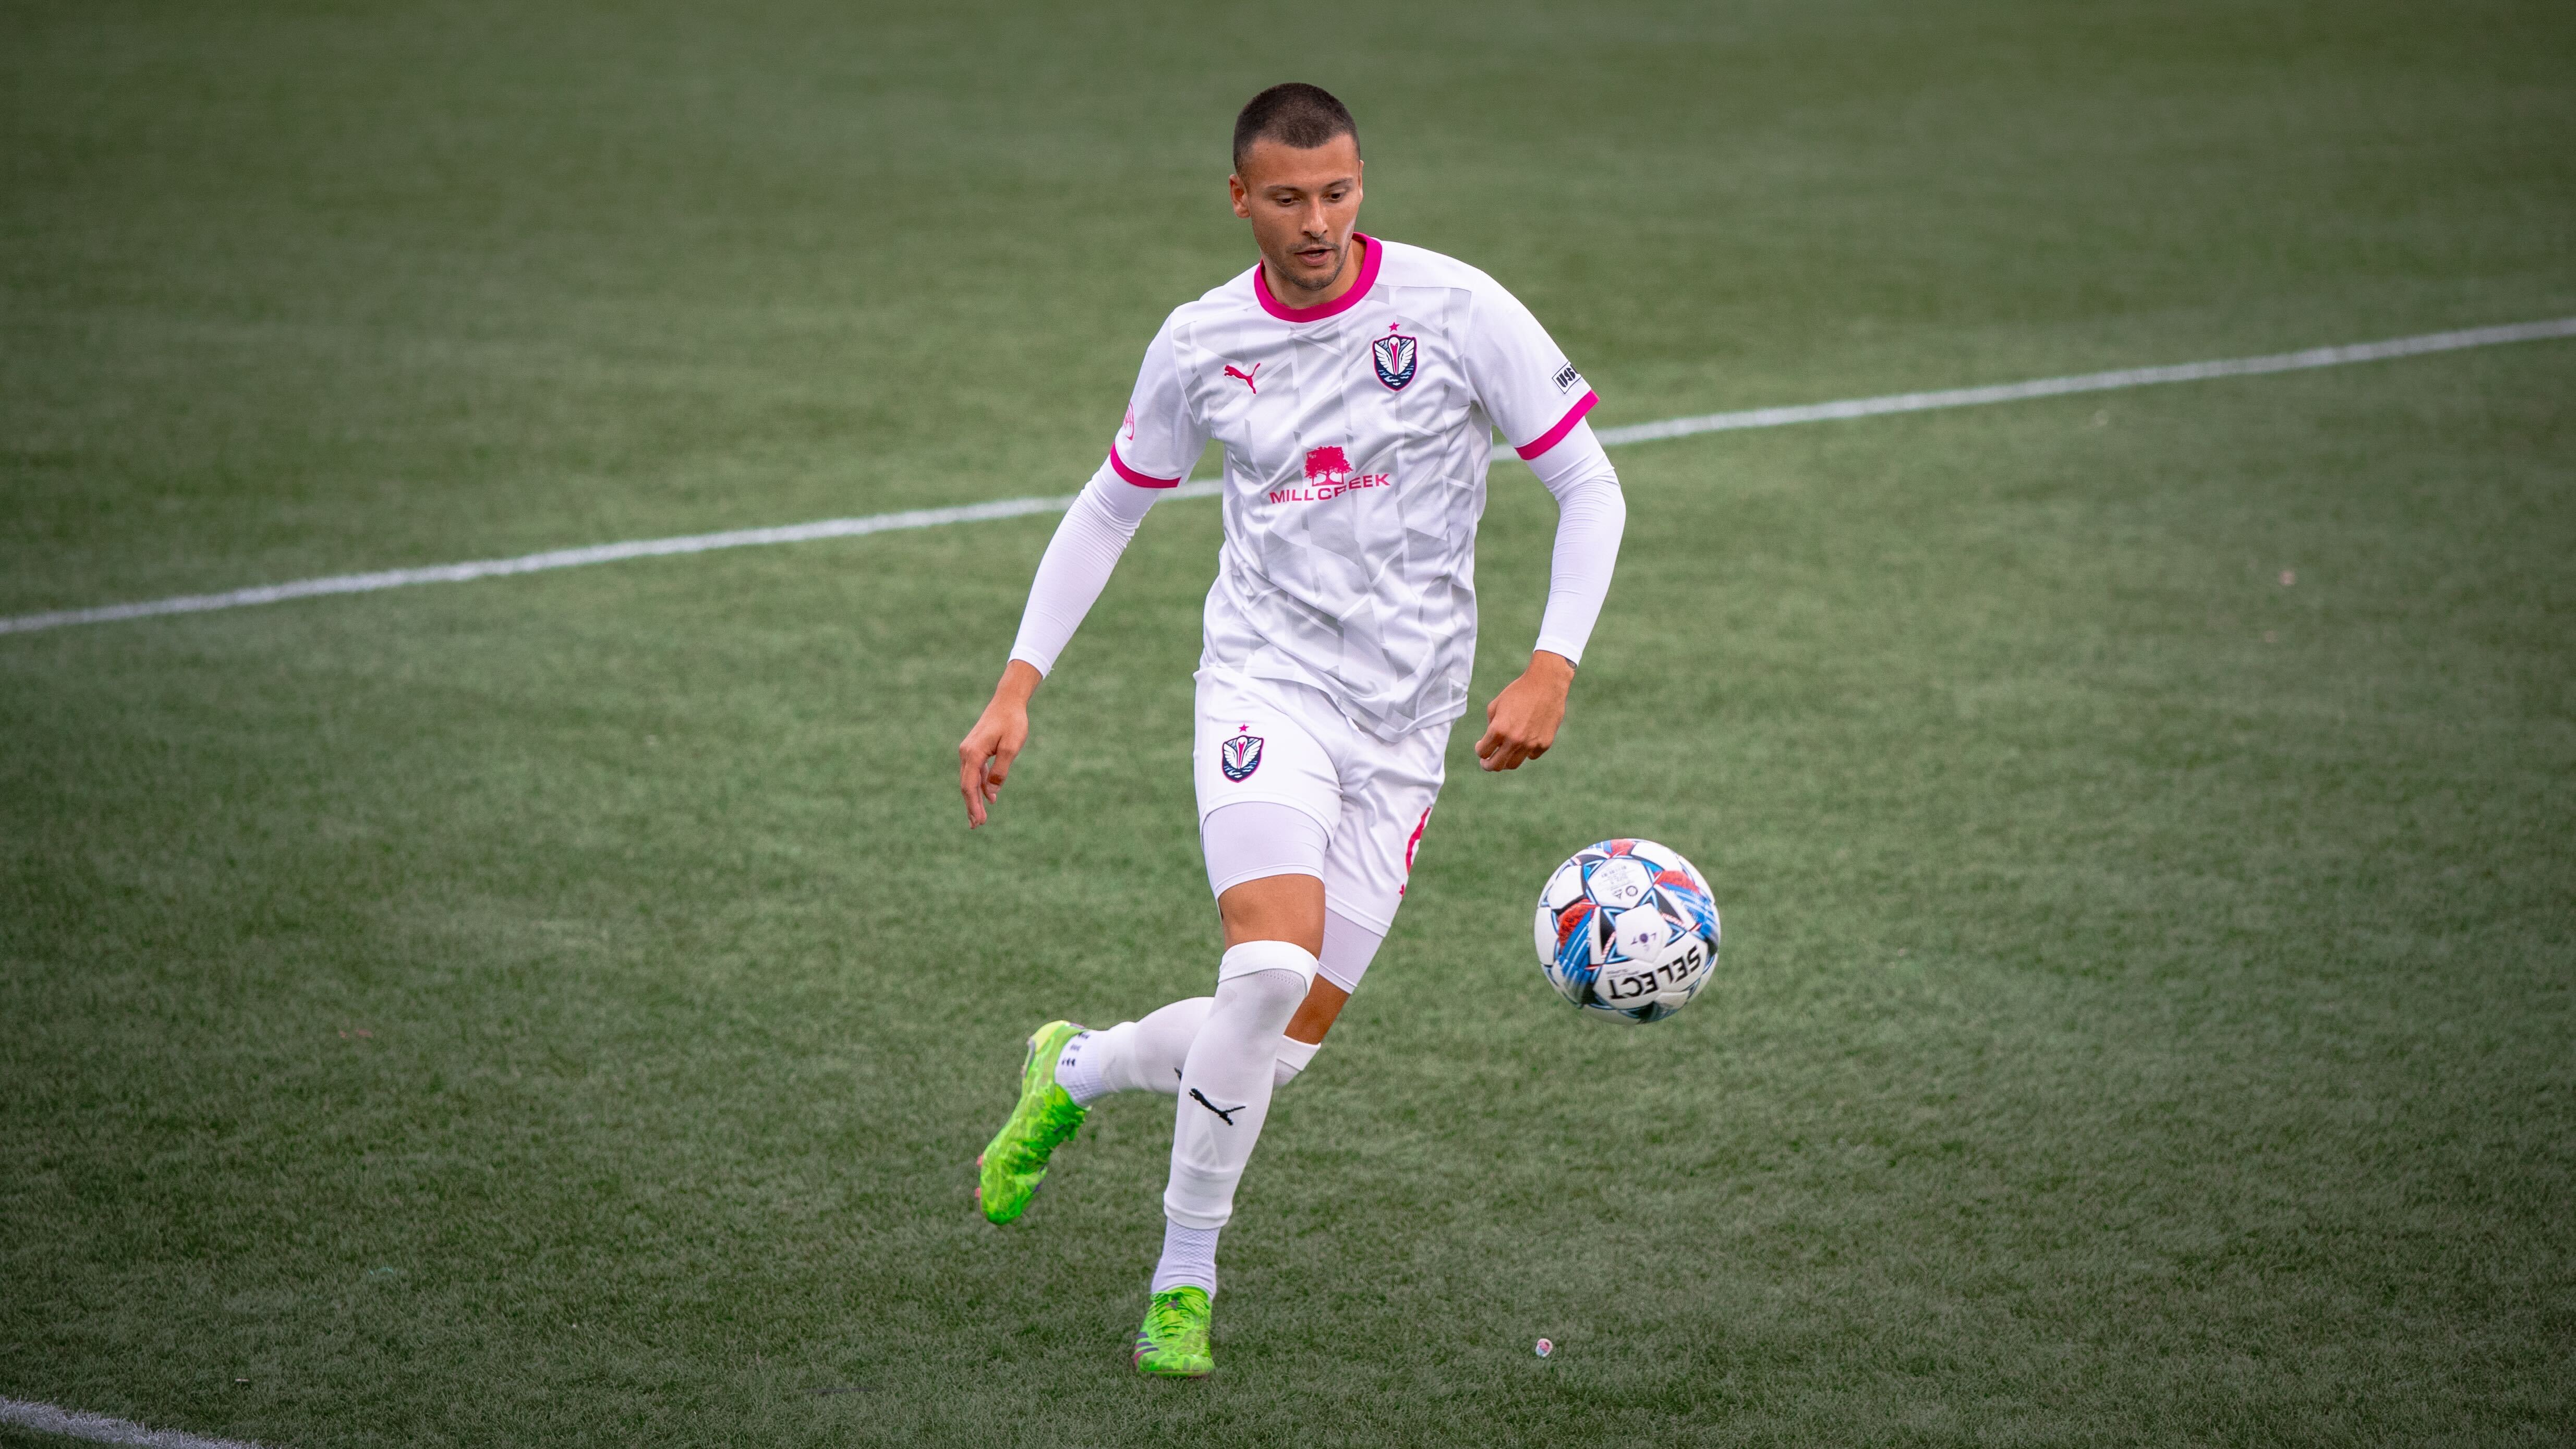 Callum Stretch Named to USL League One Team of the Week featured image